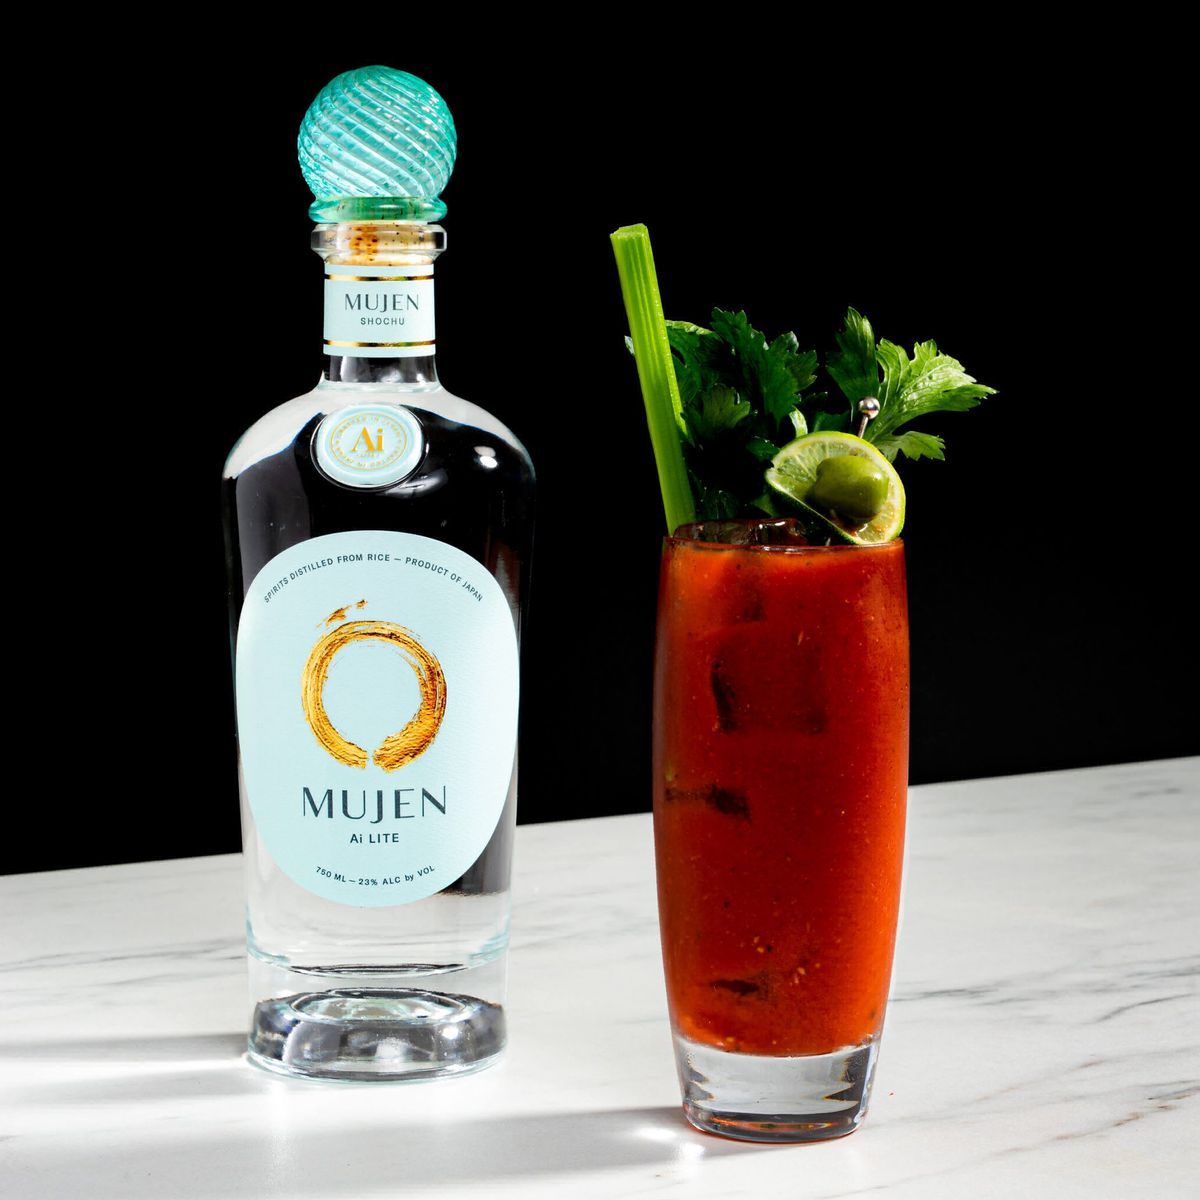 Red as the rising sun, the Bloody Mary is a rare specimen of the cocktail world. Ai Bloody Mary is a simple twist on a classic. MUJEN's aroma from rice koji makes it even more savory.